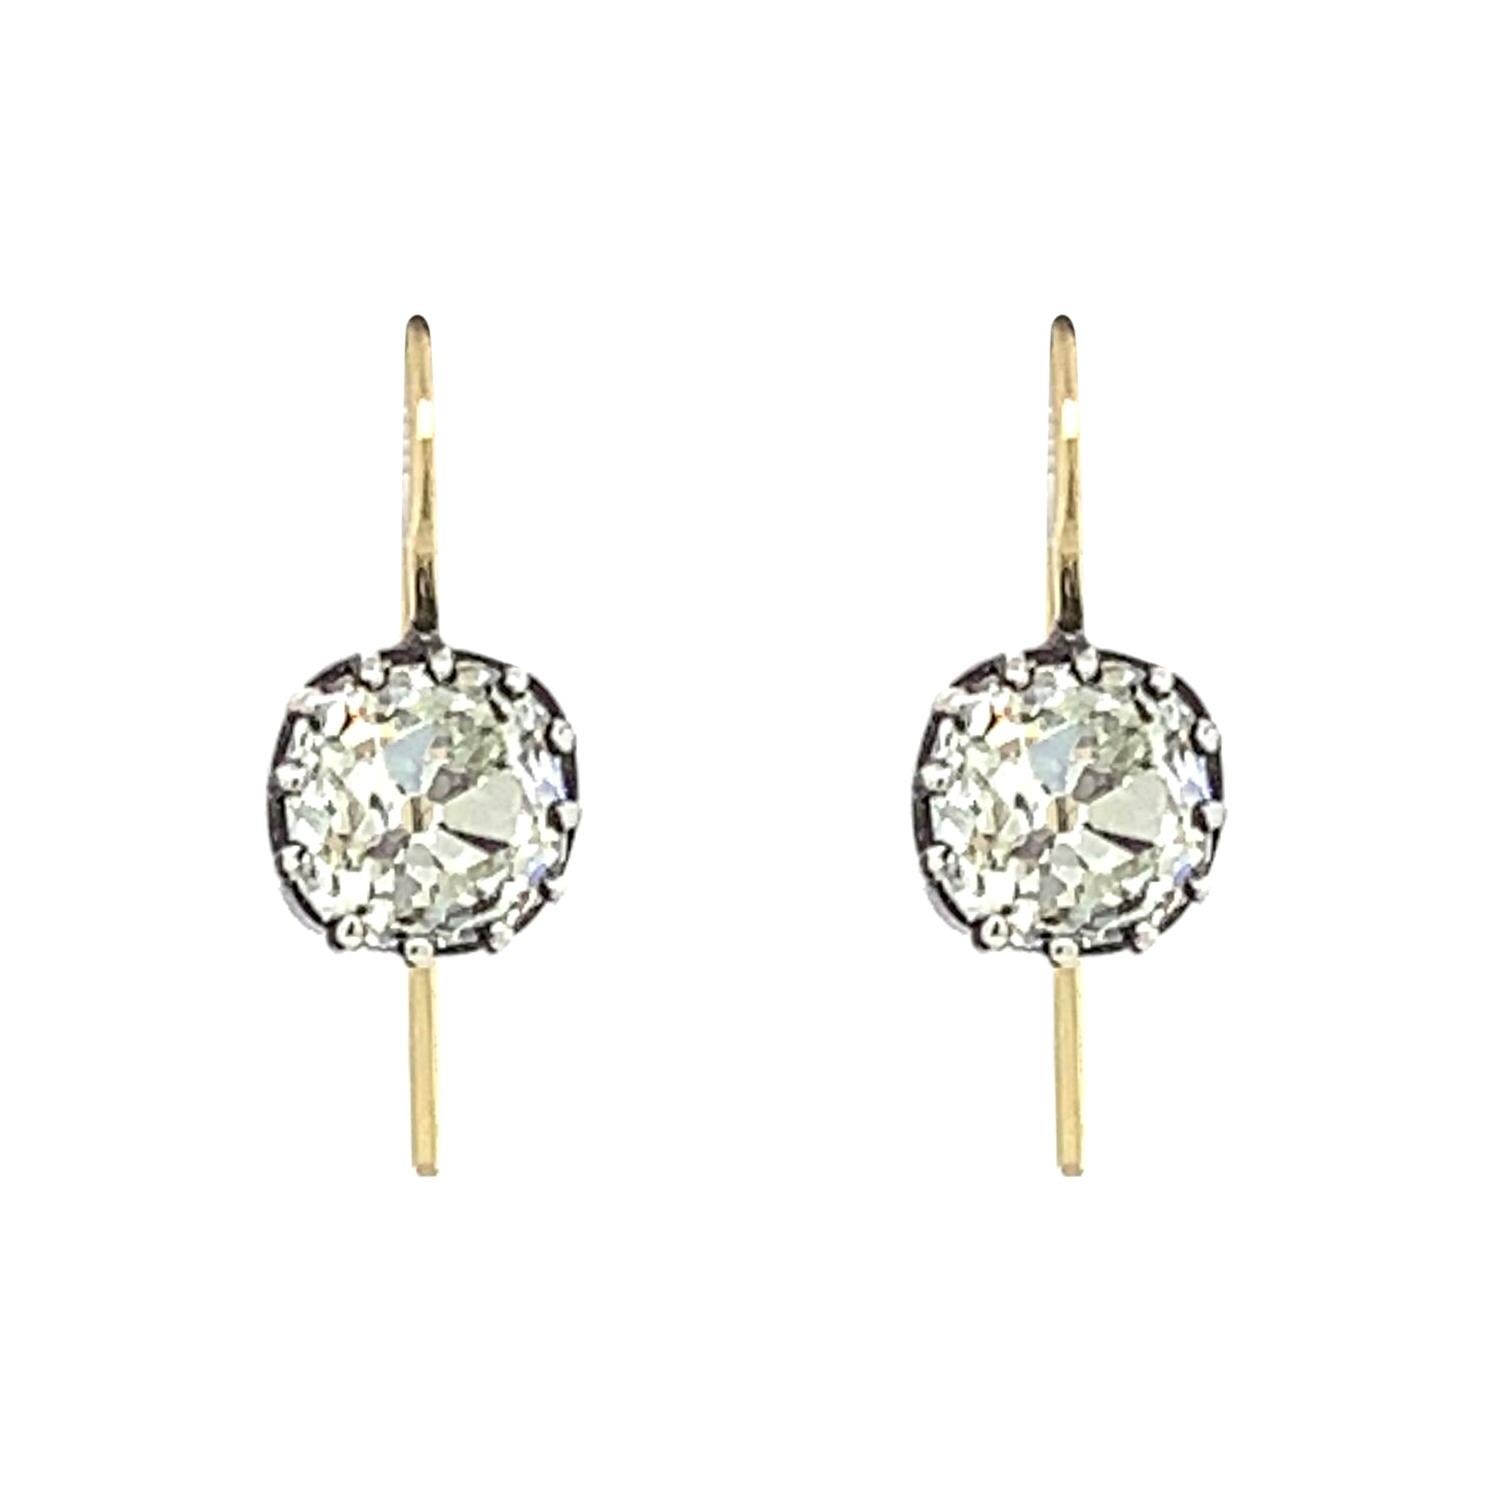 Antique Silver and Gold Diamond Earrings